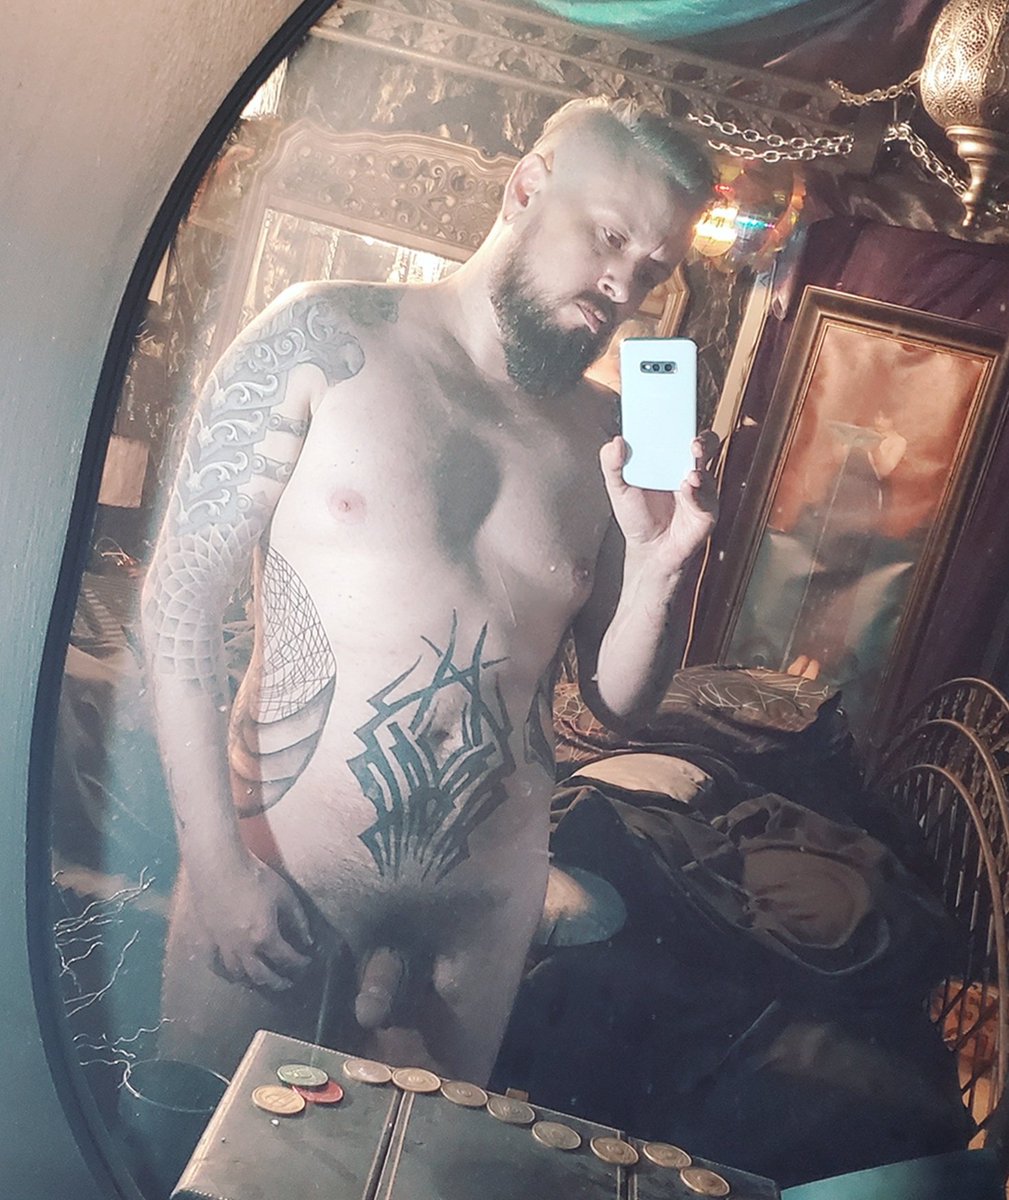 All cleaned up. #performanceartist #fetish #gayshit #gayink #beardedhomo